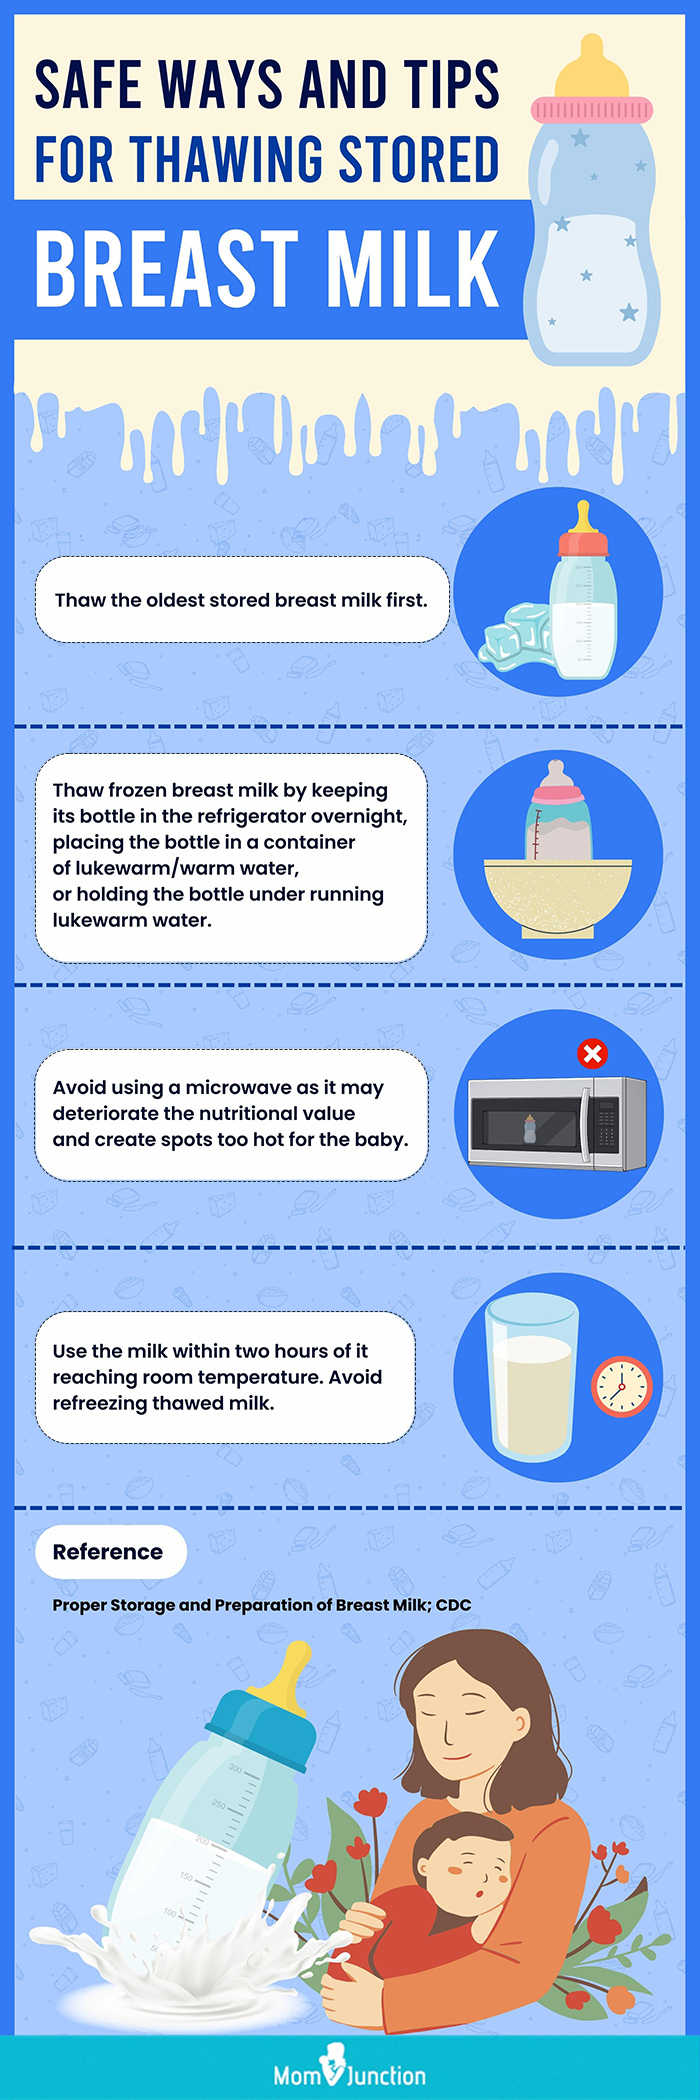 https://cdn2.momjunction.com/wp-content/uploads/2021/11/Infographic-Is-There-A-Particular-Way-To-Thaw-Frozen-Breast-Milk.jpg